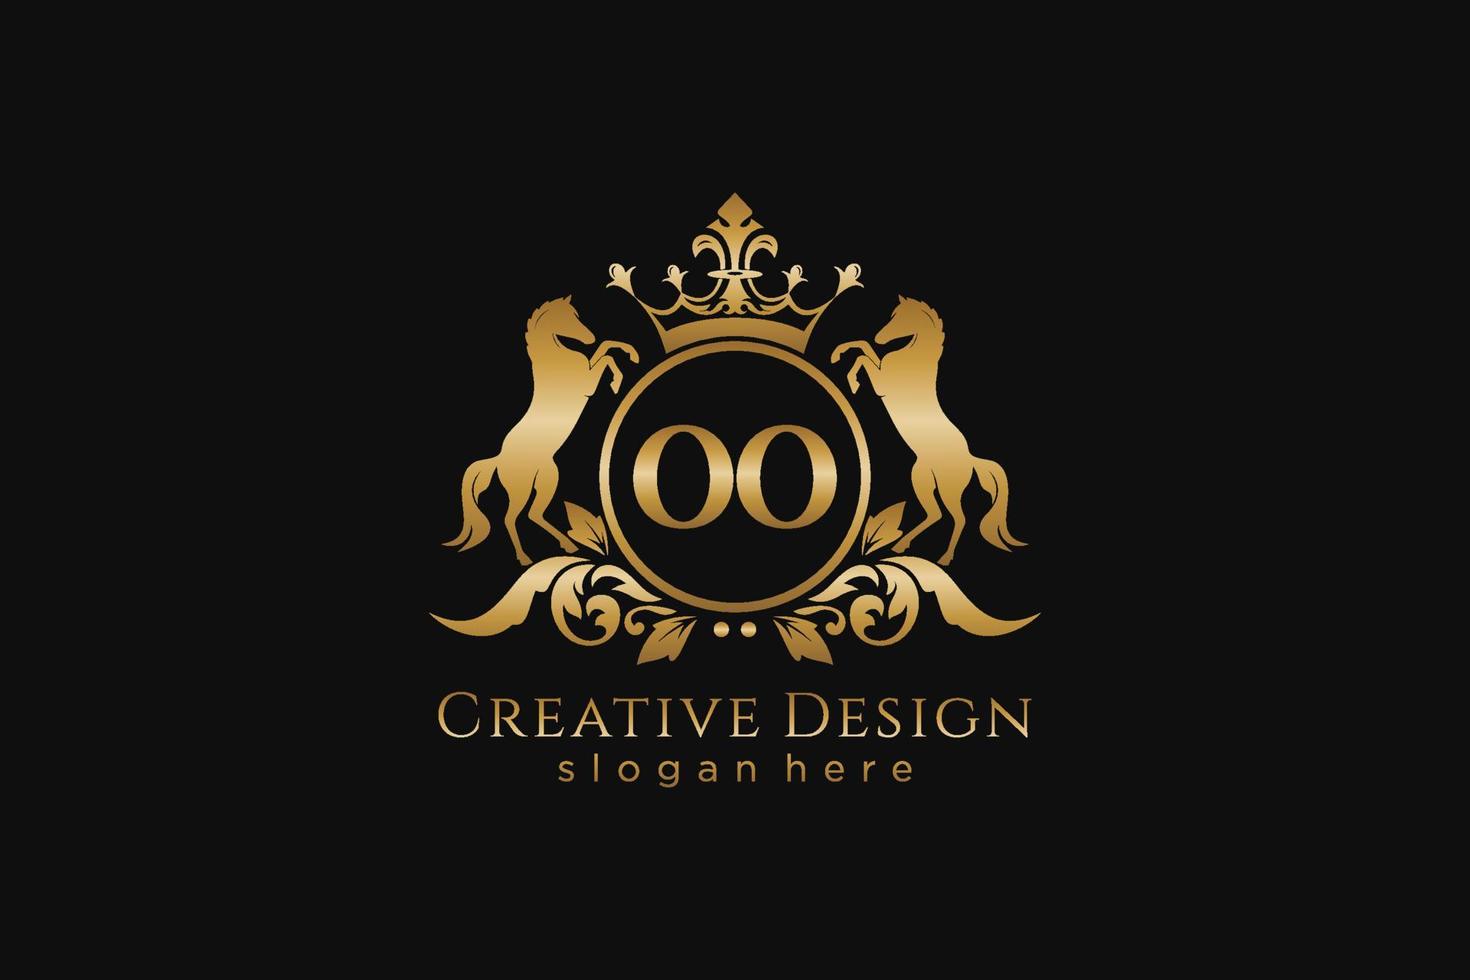 initial OO Retro golden crest with circle and two horses, badge template with scrolls and royal crown - perfect for luxurious branding projects vector